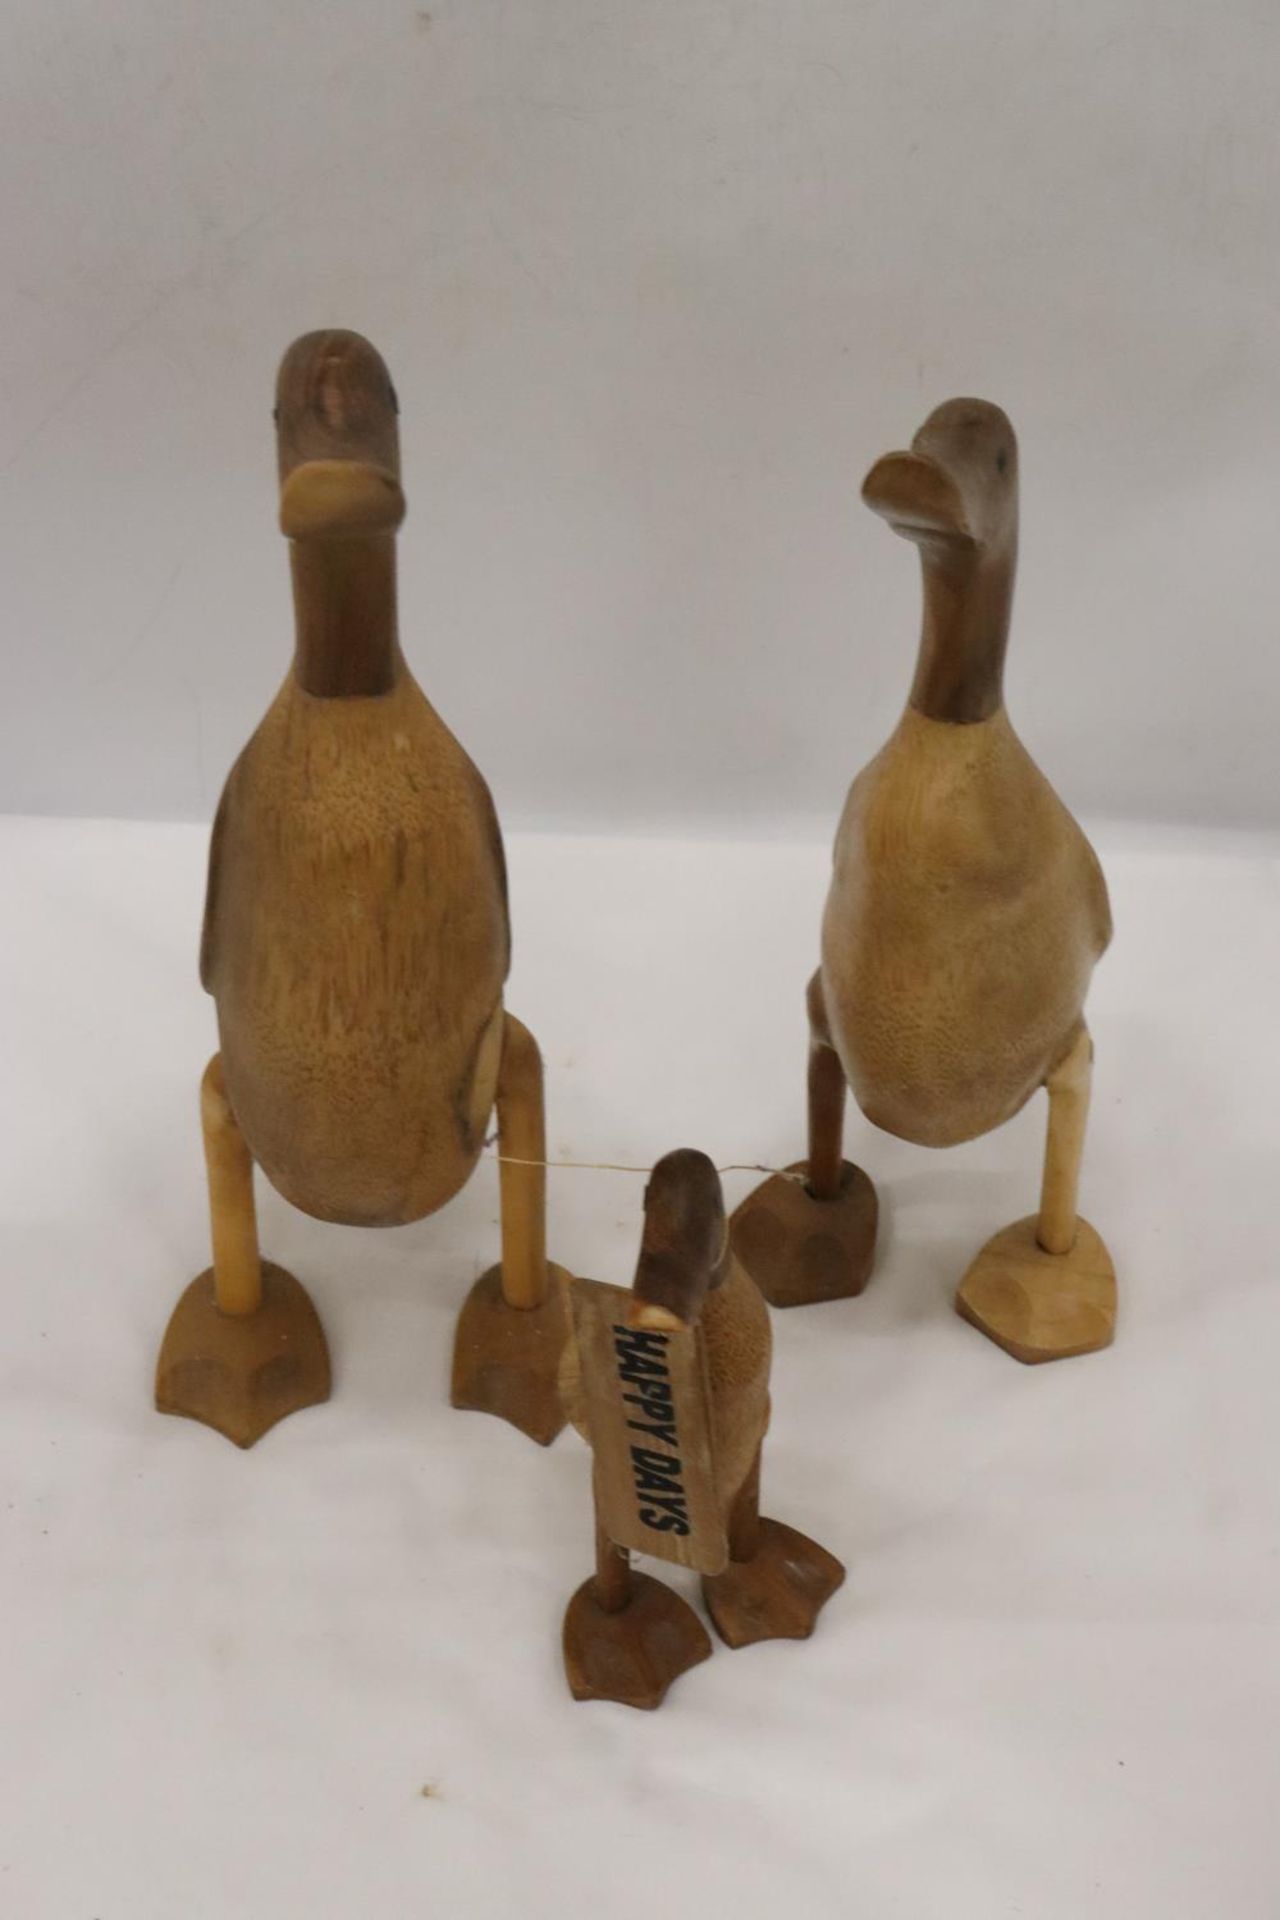 A WOODEN DUCK FAMILY TO INCLUDE DADDY DUCK, MUMMY DUCK AND BABY DUCK - Image 4 of 5